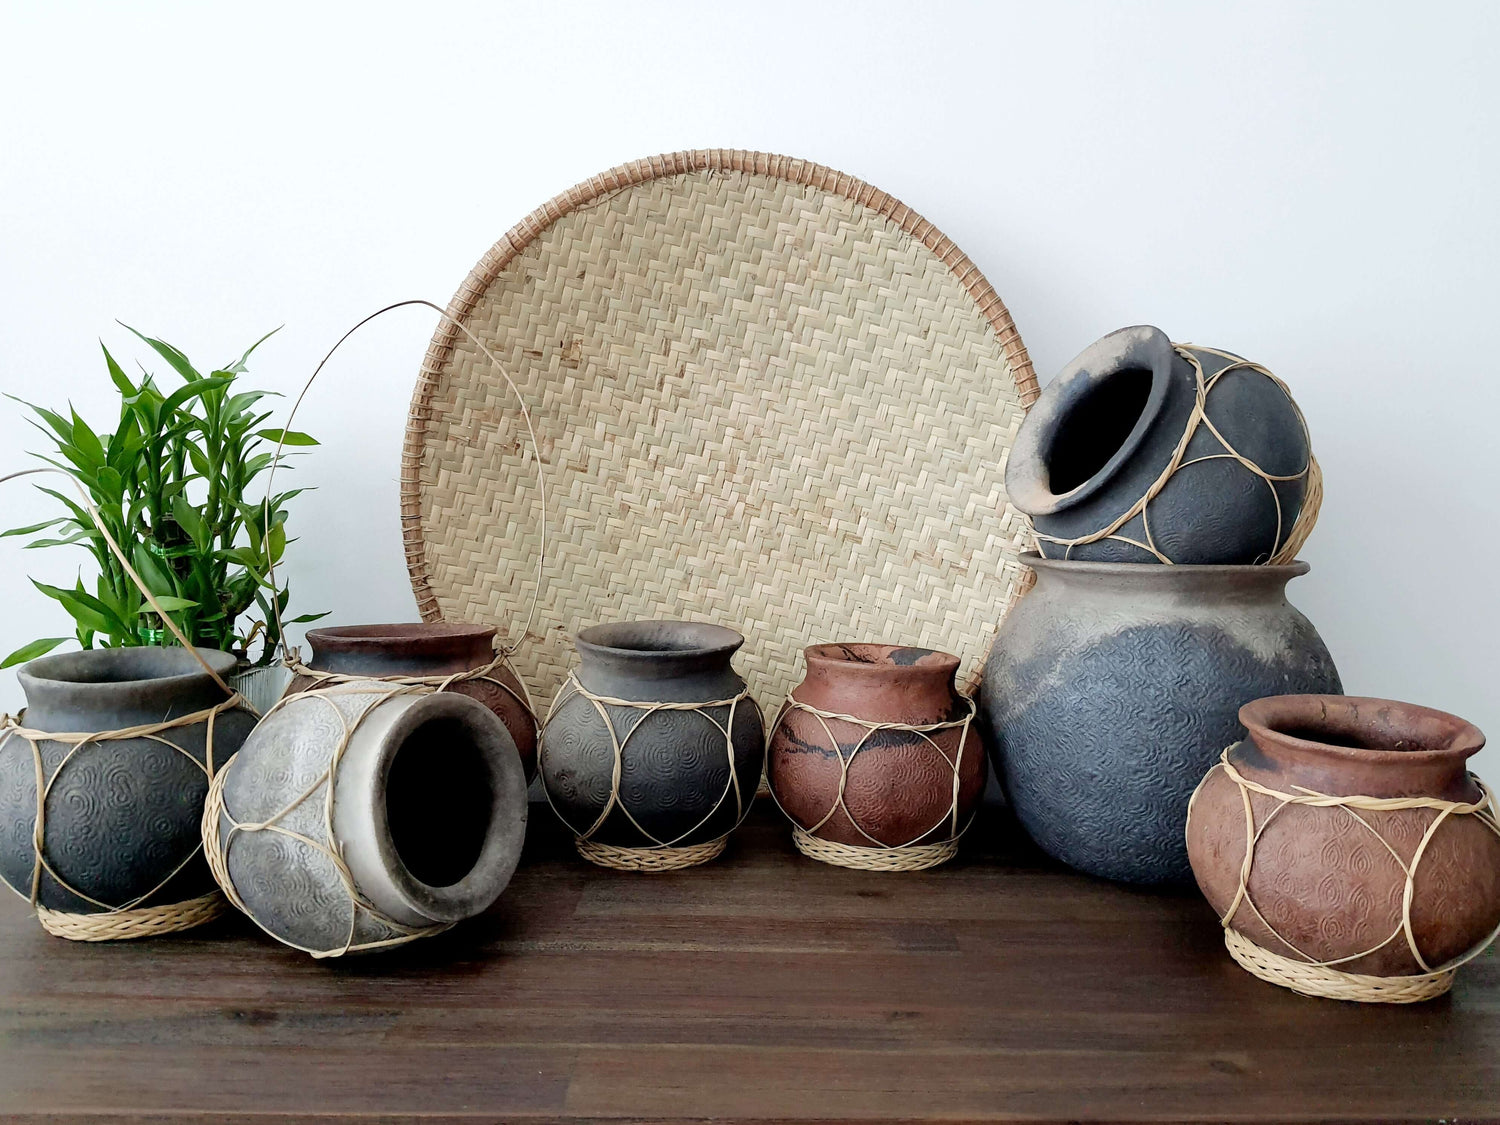 Iban Pottery